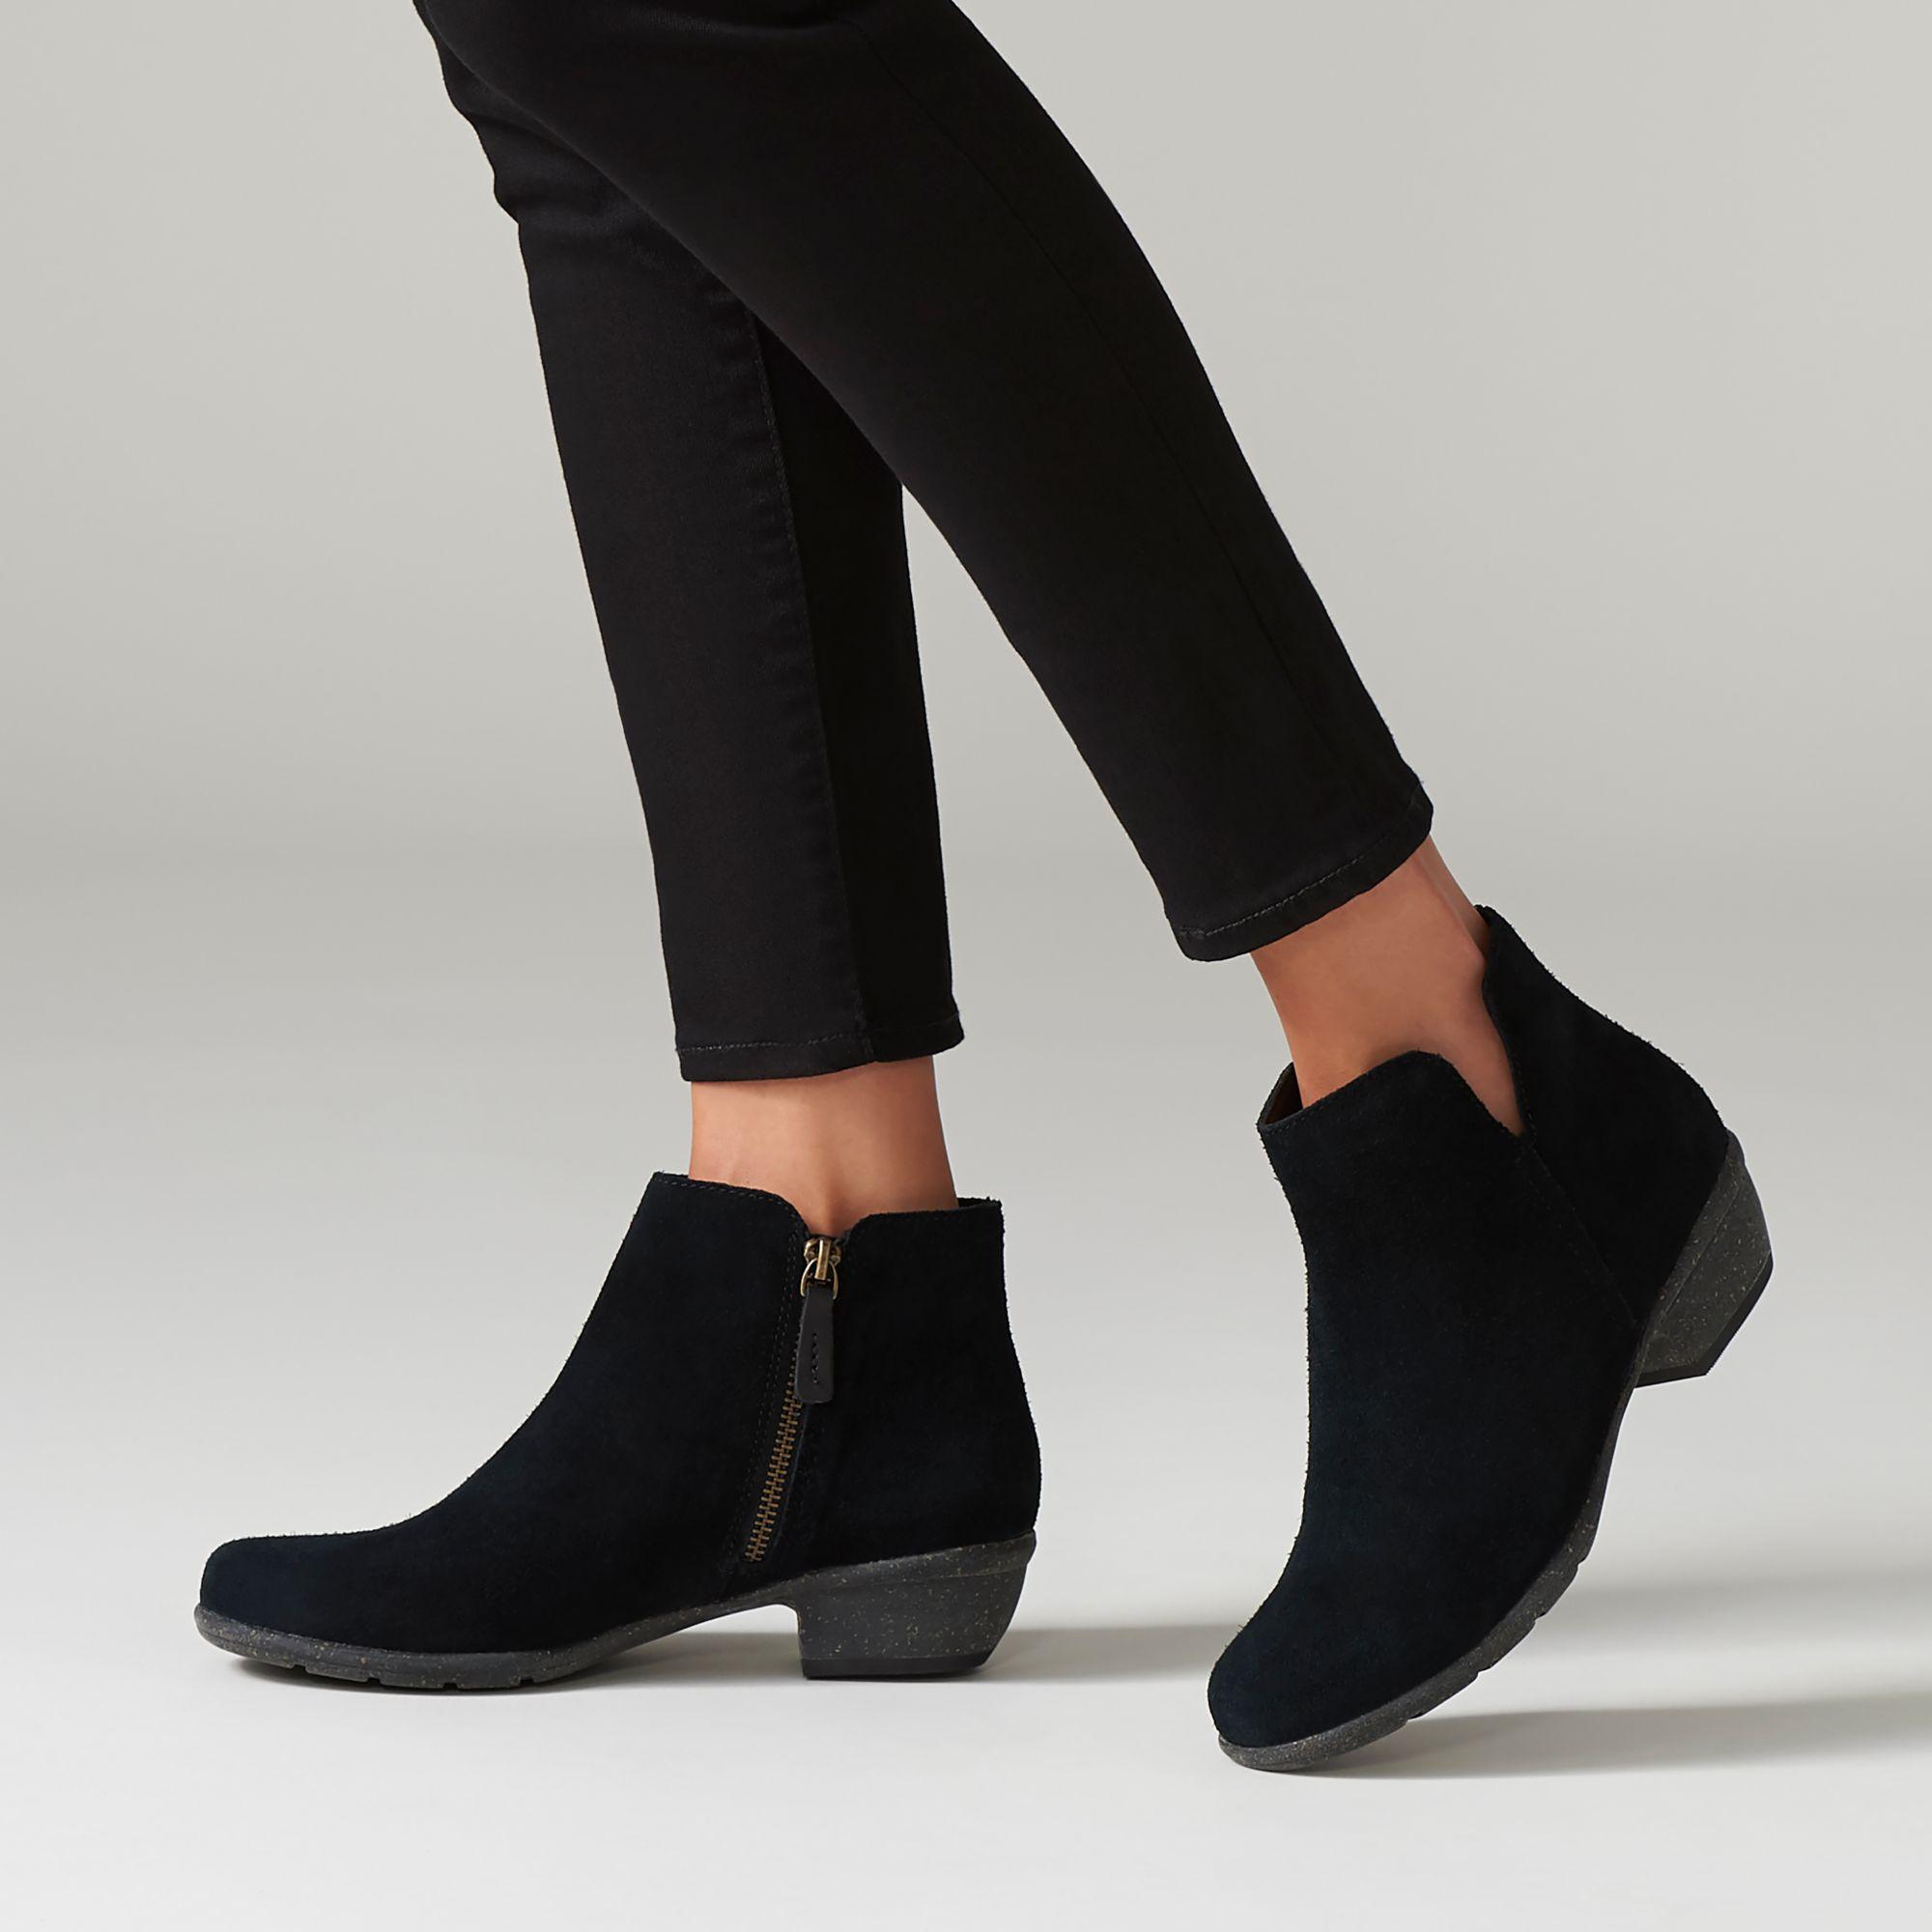 clarks wilrose frost bootie b897e5